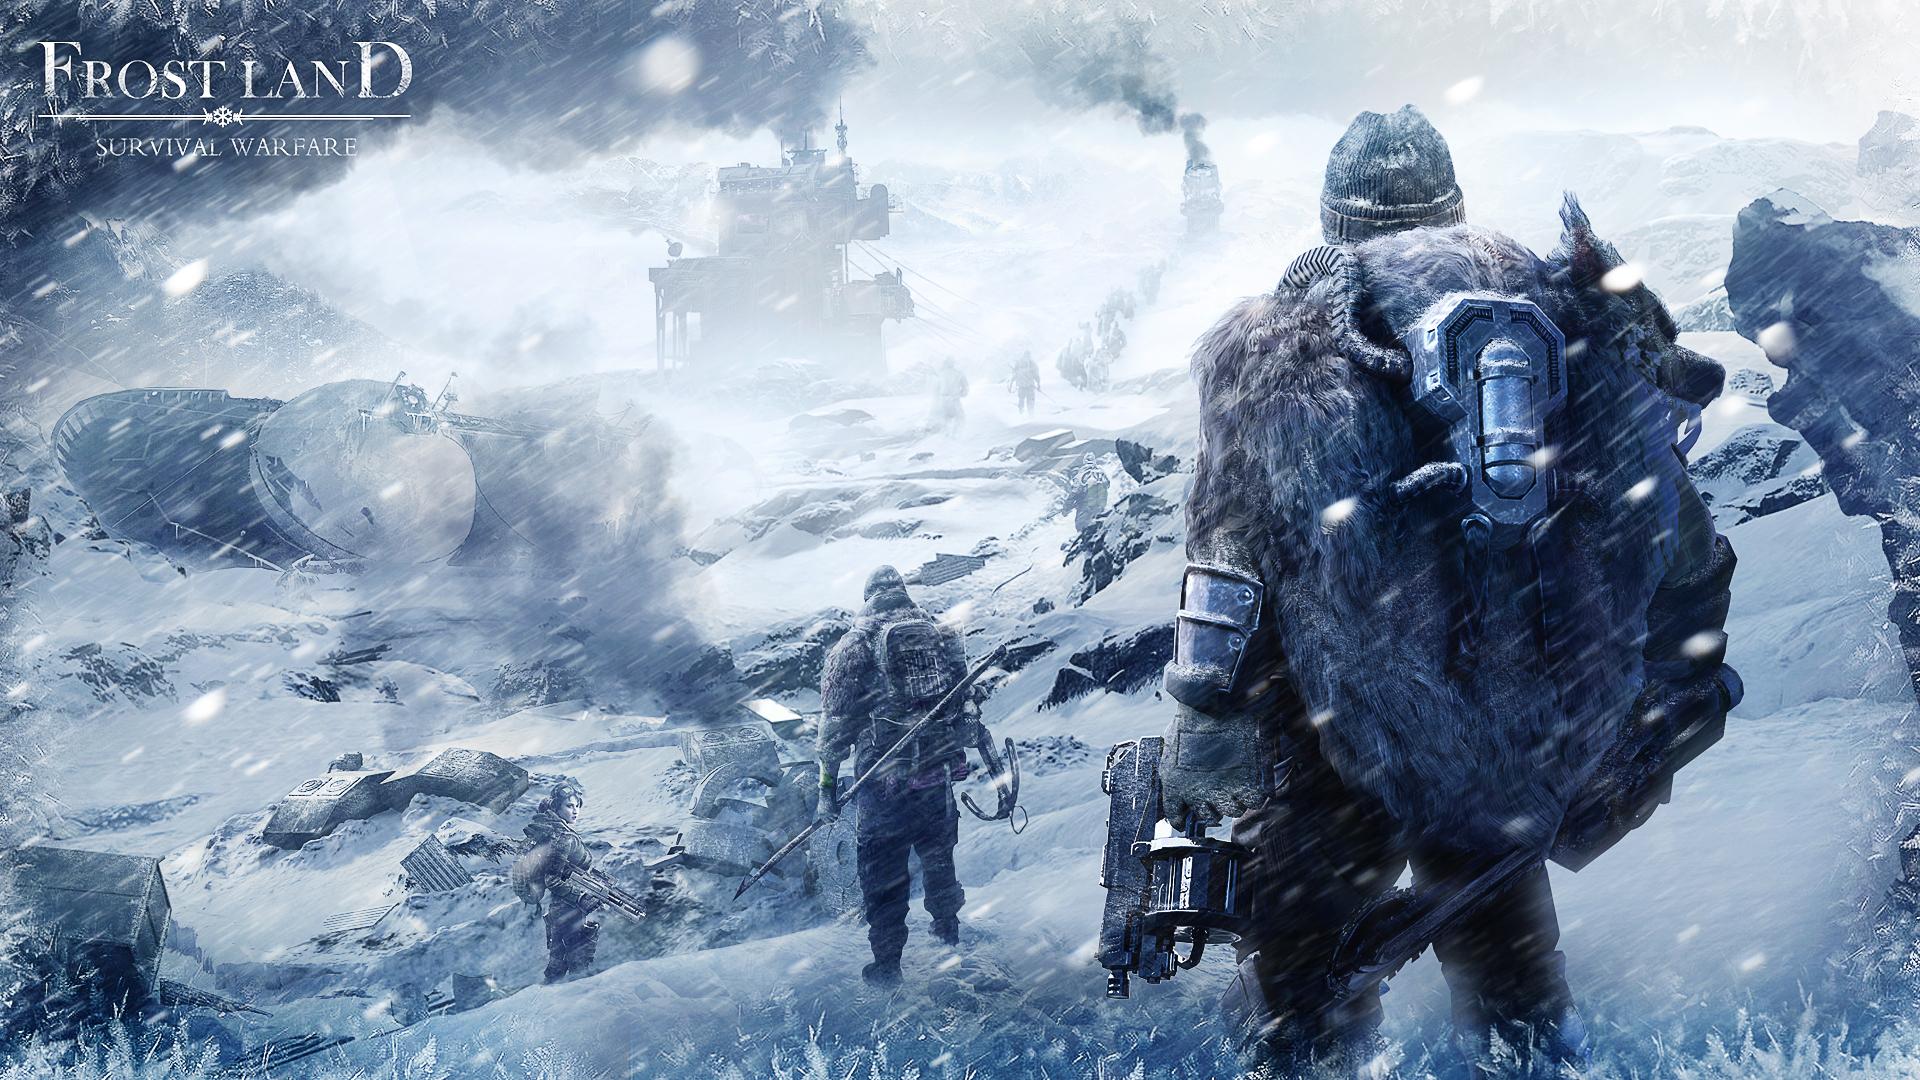 call of duty frost